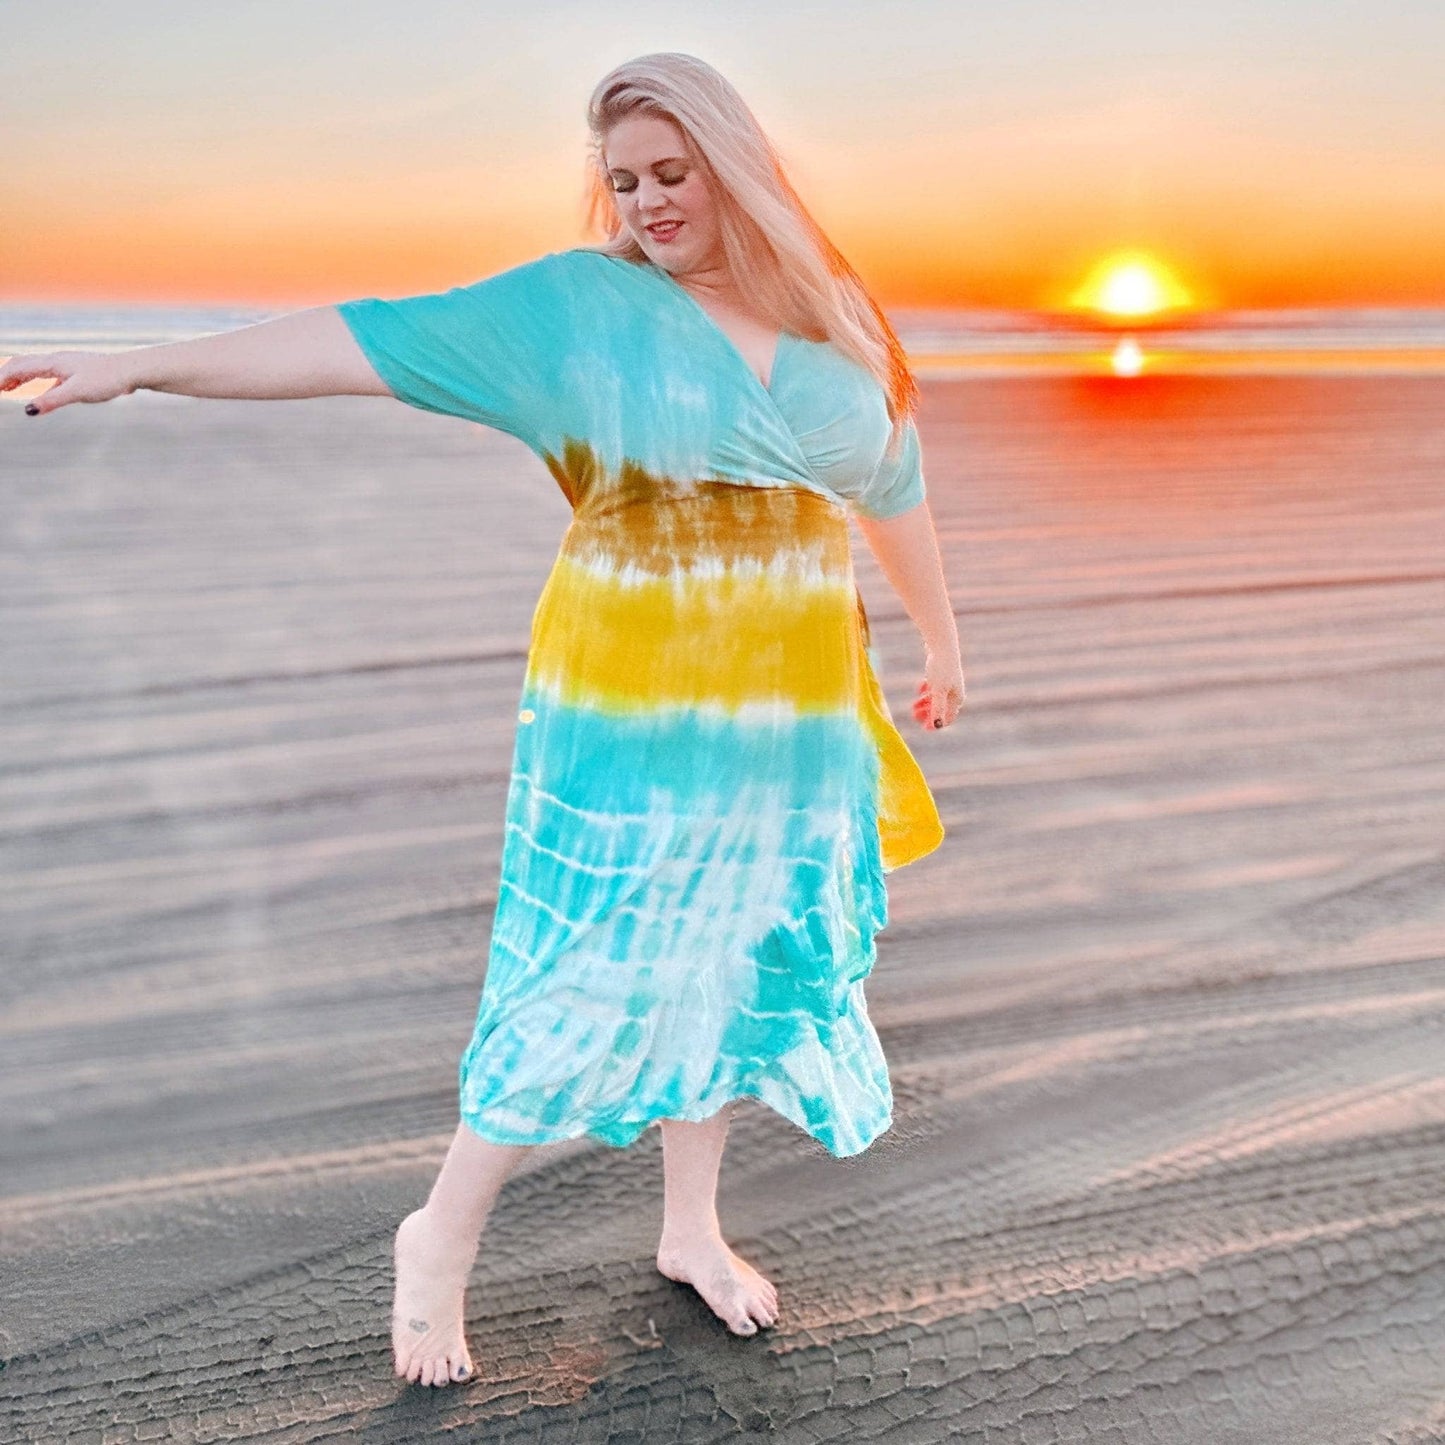 A blonde woman on a beach during sunset wearing a tie dye wrap dress. She's letting her toes run through the sand.